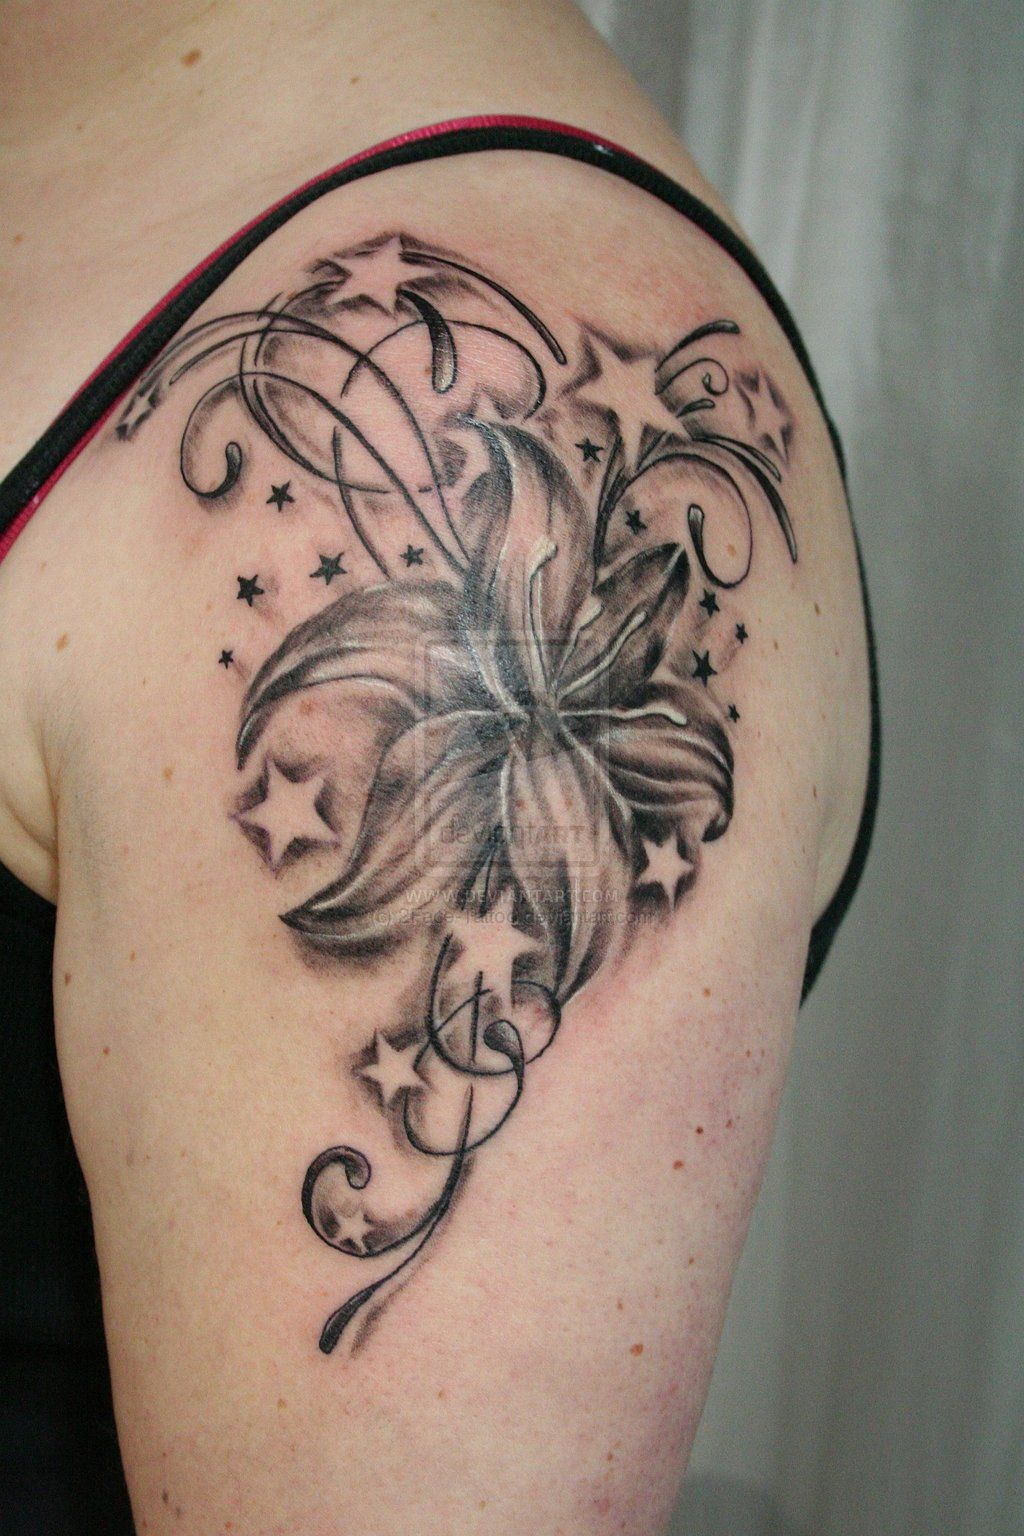 Unique Tribal Flower Tattoo Designs Are Very Well Known Specially within dimensions 1024 X 1536